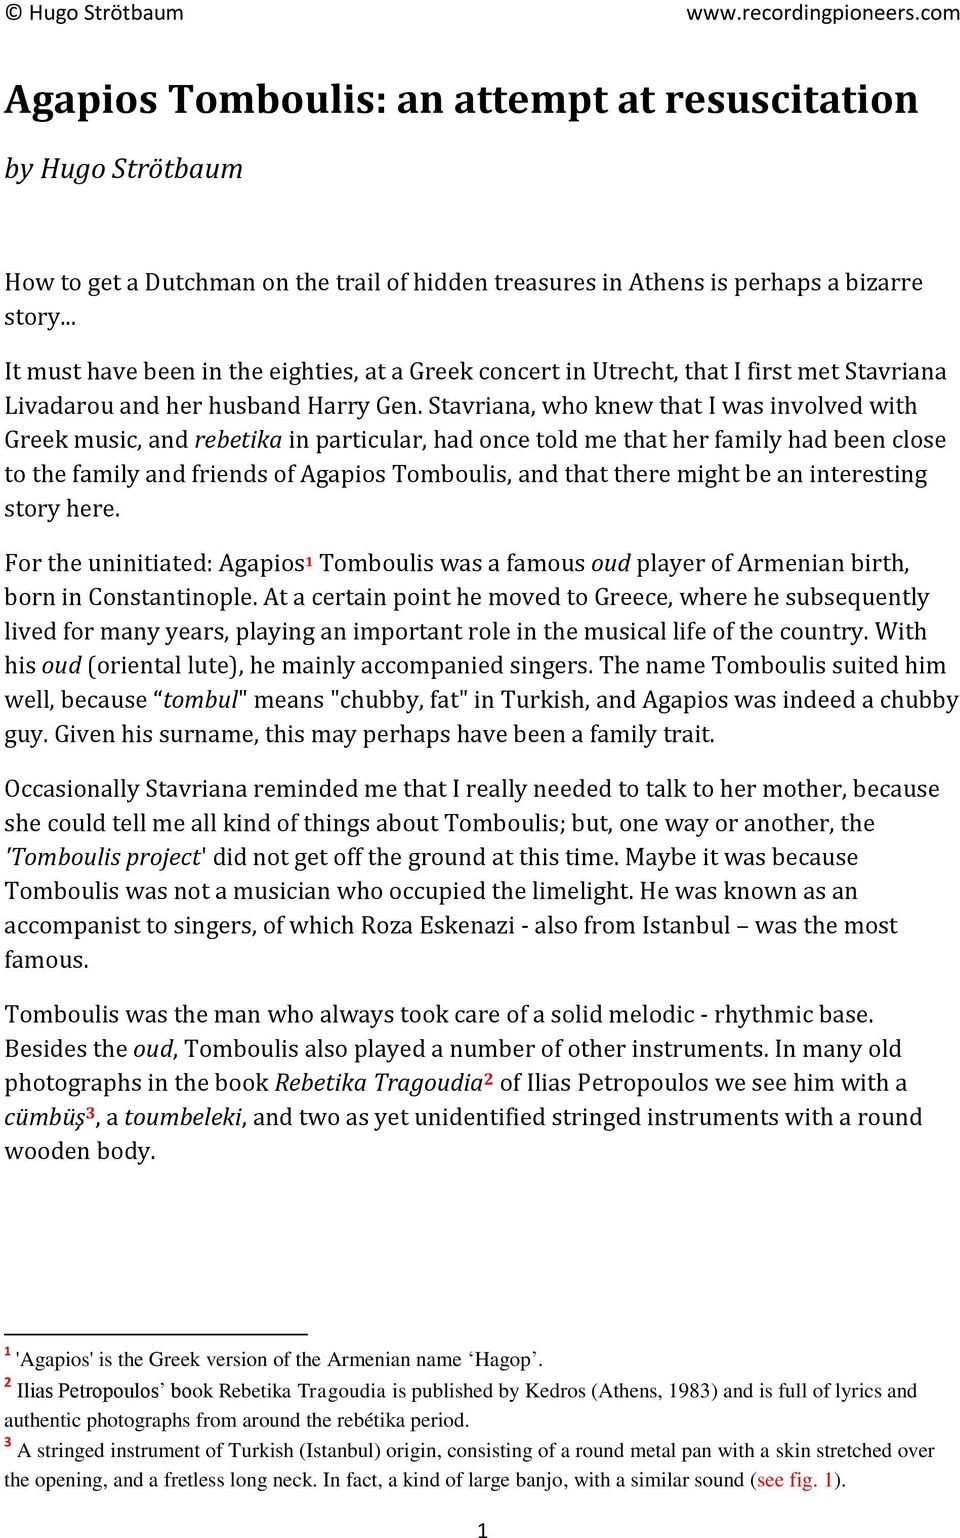 Stavriana, who knew that I was involved with Greek music, and rebetika in particular, had once told me that her family had been close to the family and friends of Agapios Tomboulis, and that there